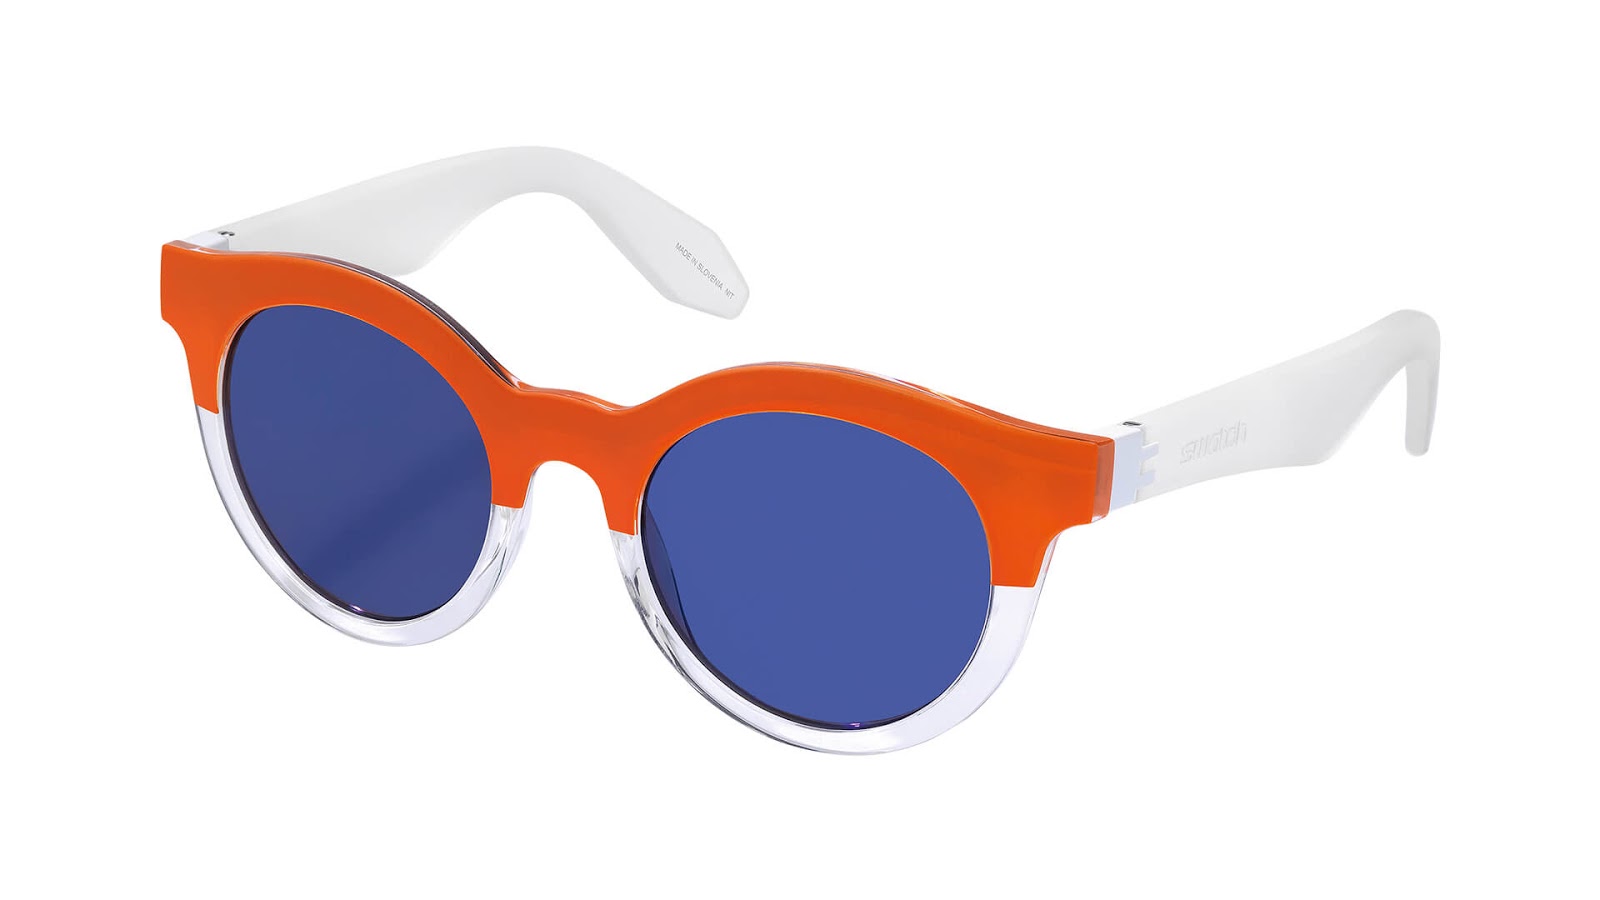 SWATCH LAUNCHES EYE WEAR COLLECTION: "Swatch The Eyes"